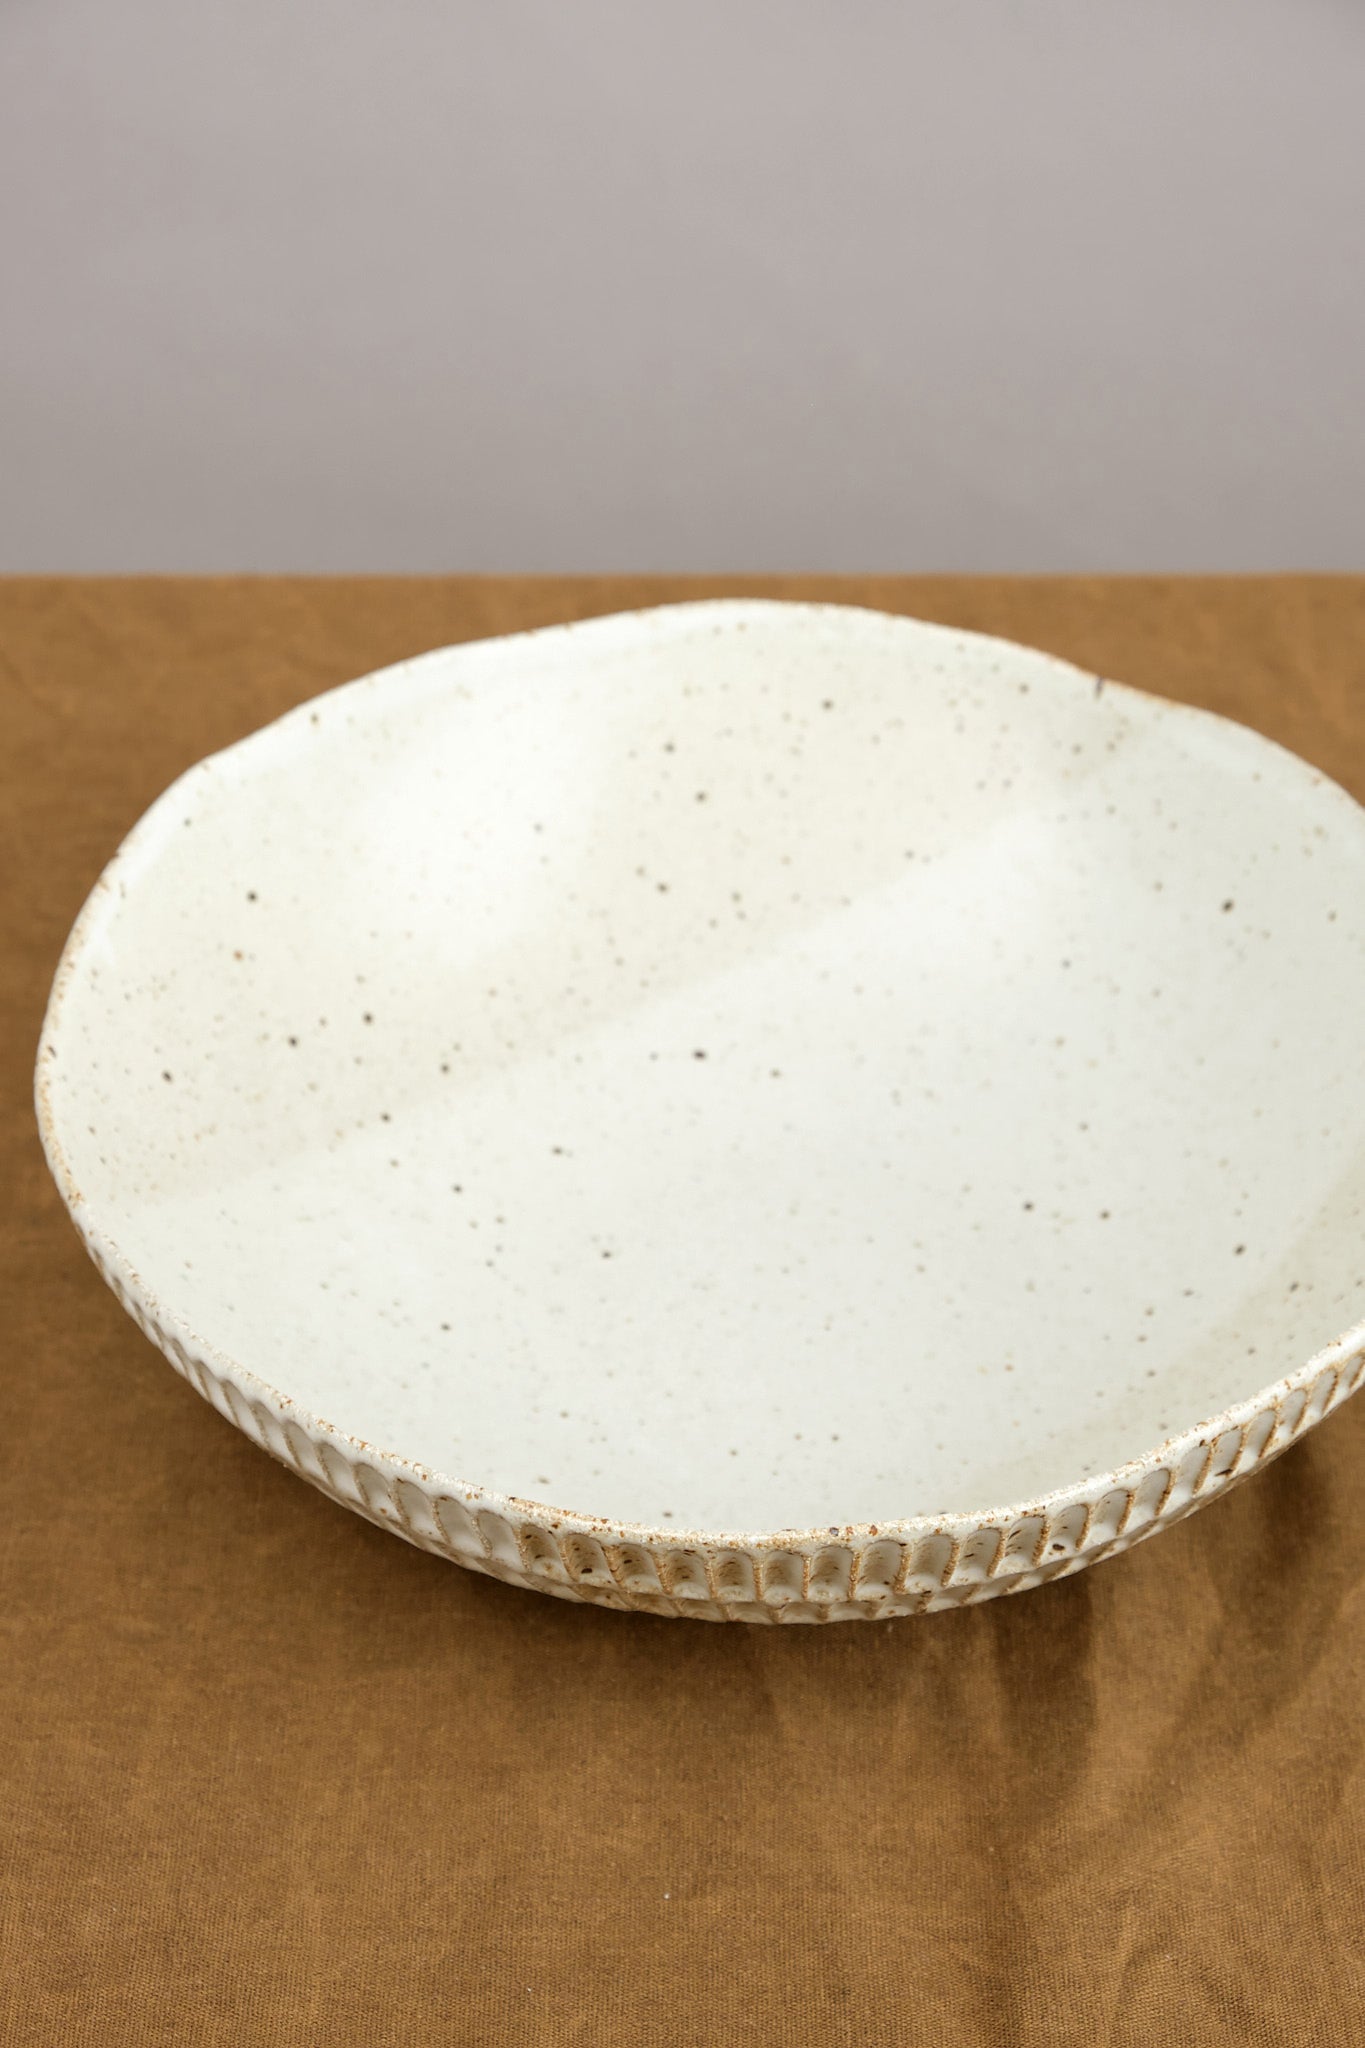 Carved Eggshell Serving Bowl in Speckled White Mt. Washington Pottery 